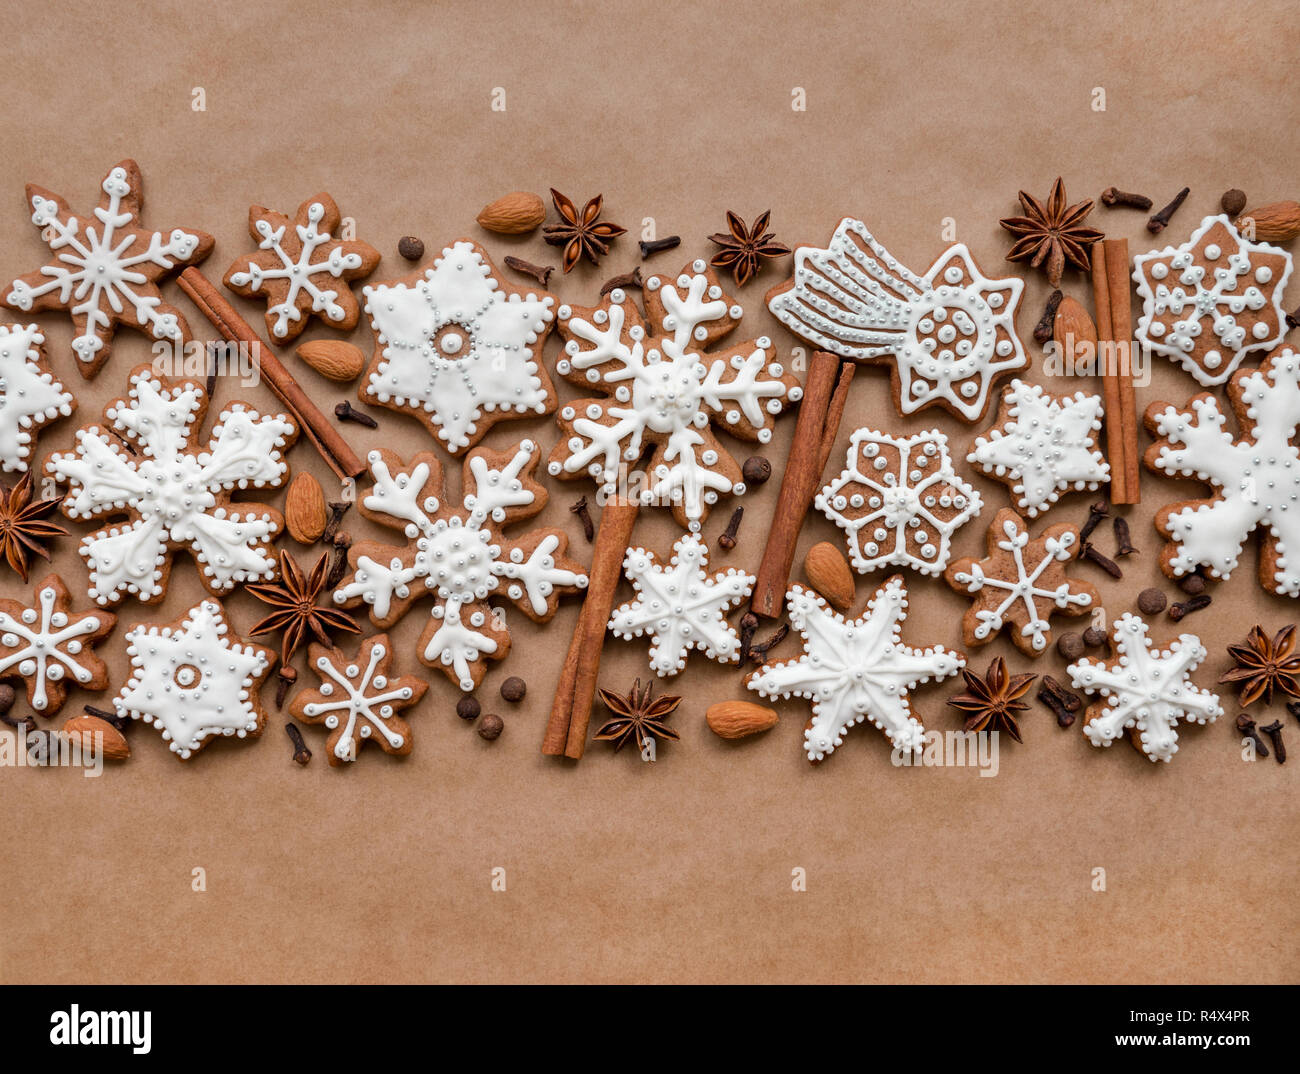 Christmas dekoration with spices and cookies in the shape of snowflakes on dark brown paper background. Top view. Stock Photo